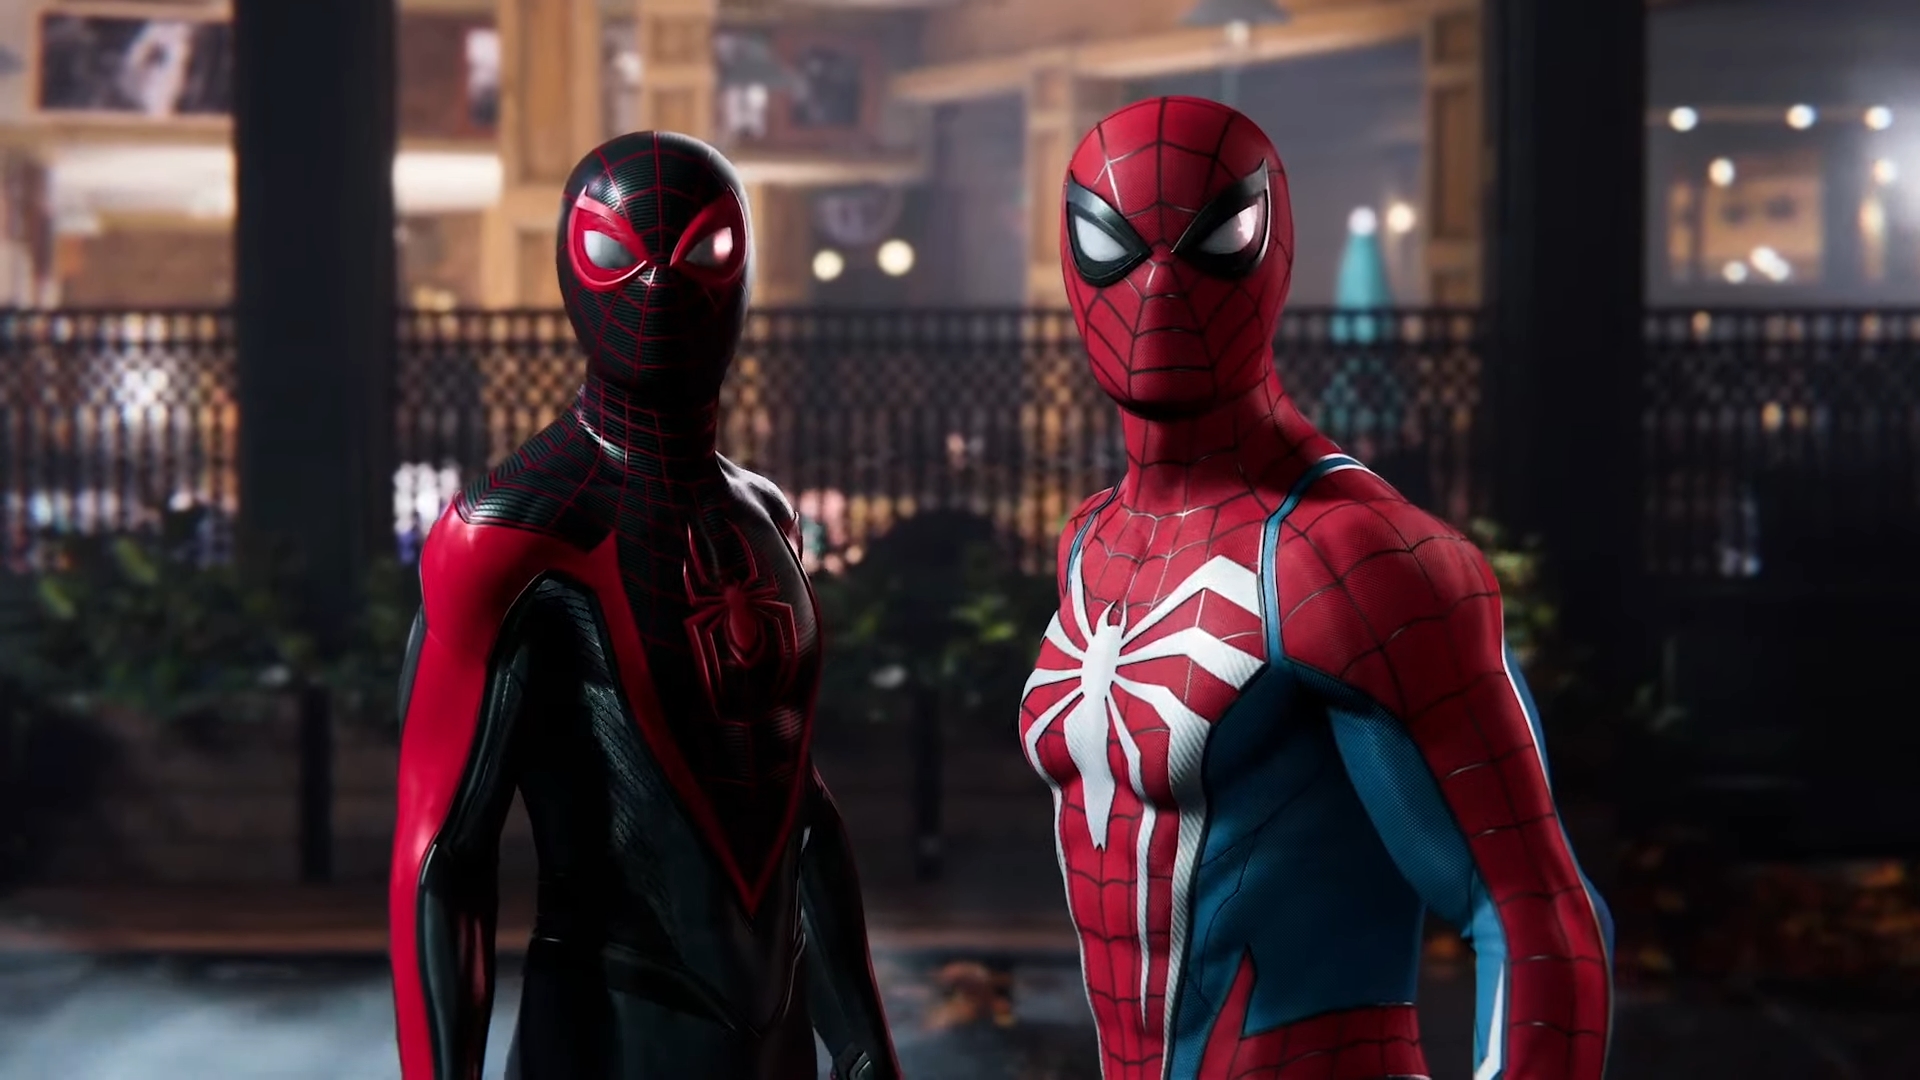 Marvel's Spider-Man 2 screenshot showing Peter Parker and Miles Morales standing side-by-side in their respective Spider-Man suits